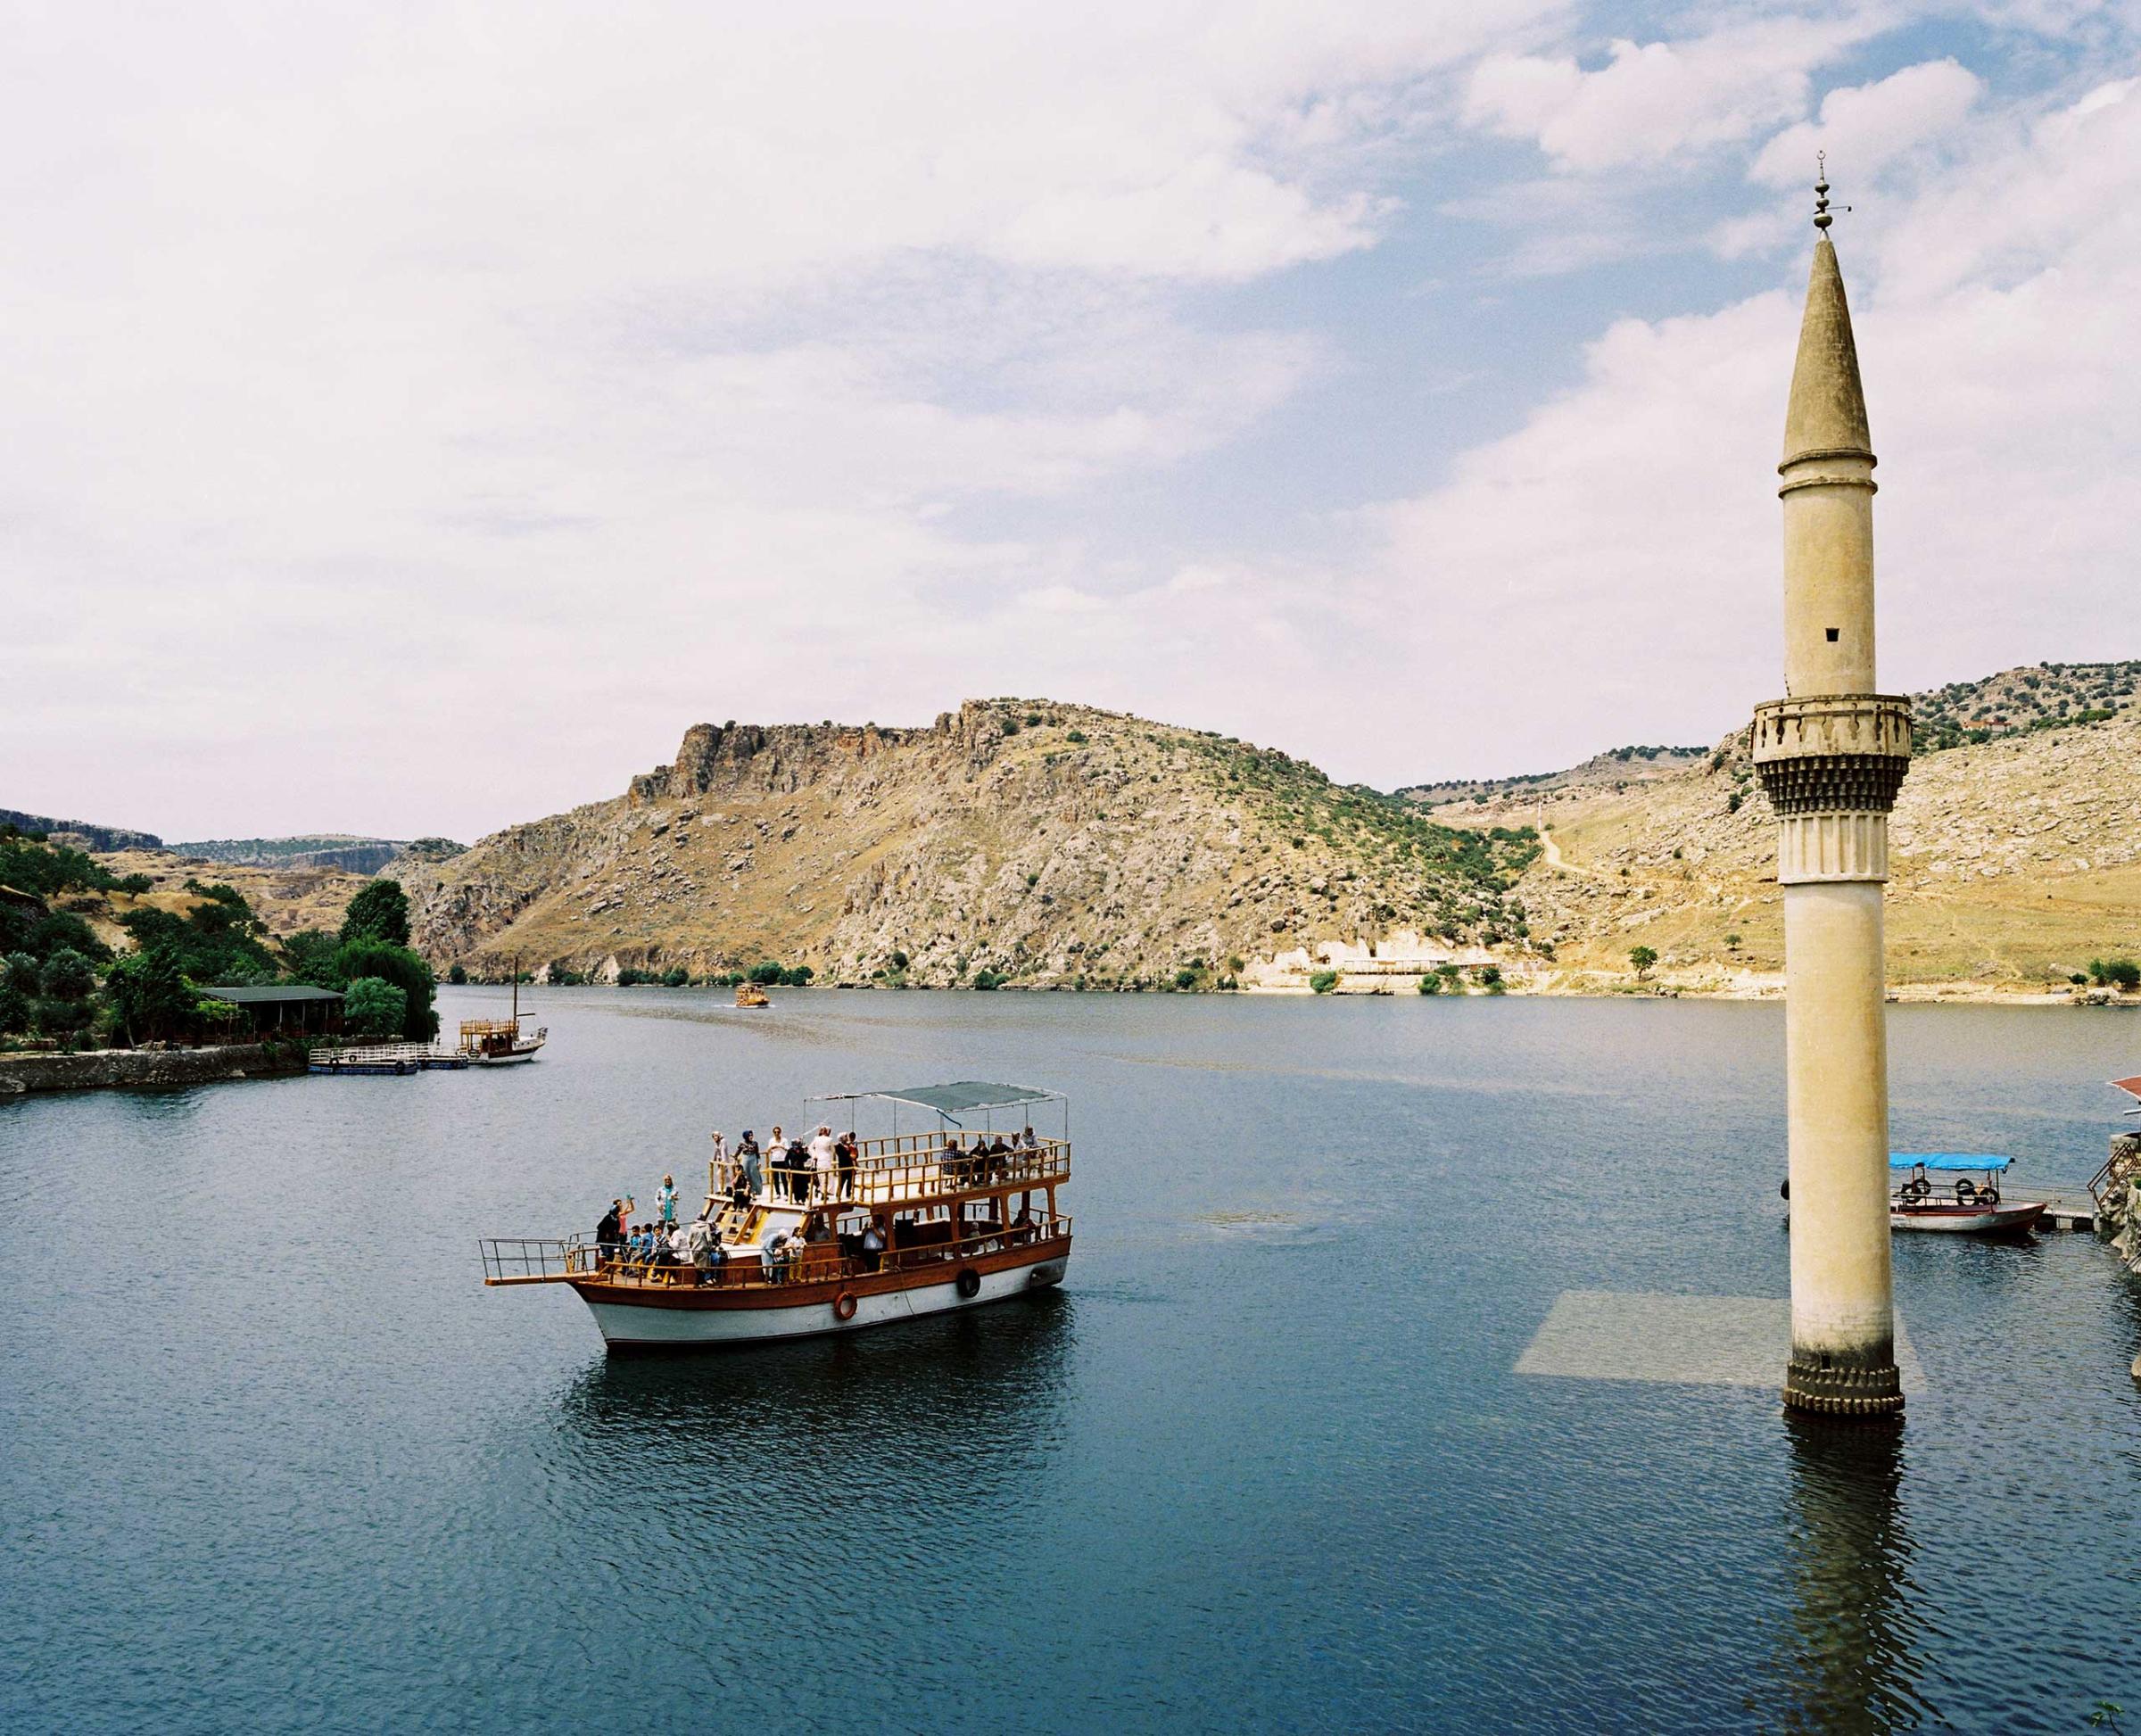 Most of the villages were submerged in the 1990s under the waters behind the dam on the Euphrates at Birecik. The town was therefore removed to the village of Karaotlak, the building of the new town is now complete. A tourist boat tour is visiting the former Savaçan Village flooded by the reservoir lake of the Birecik Dam on the Euphrates river. Turkey